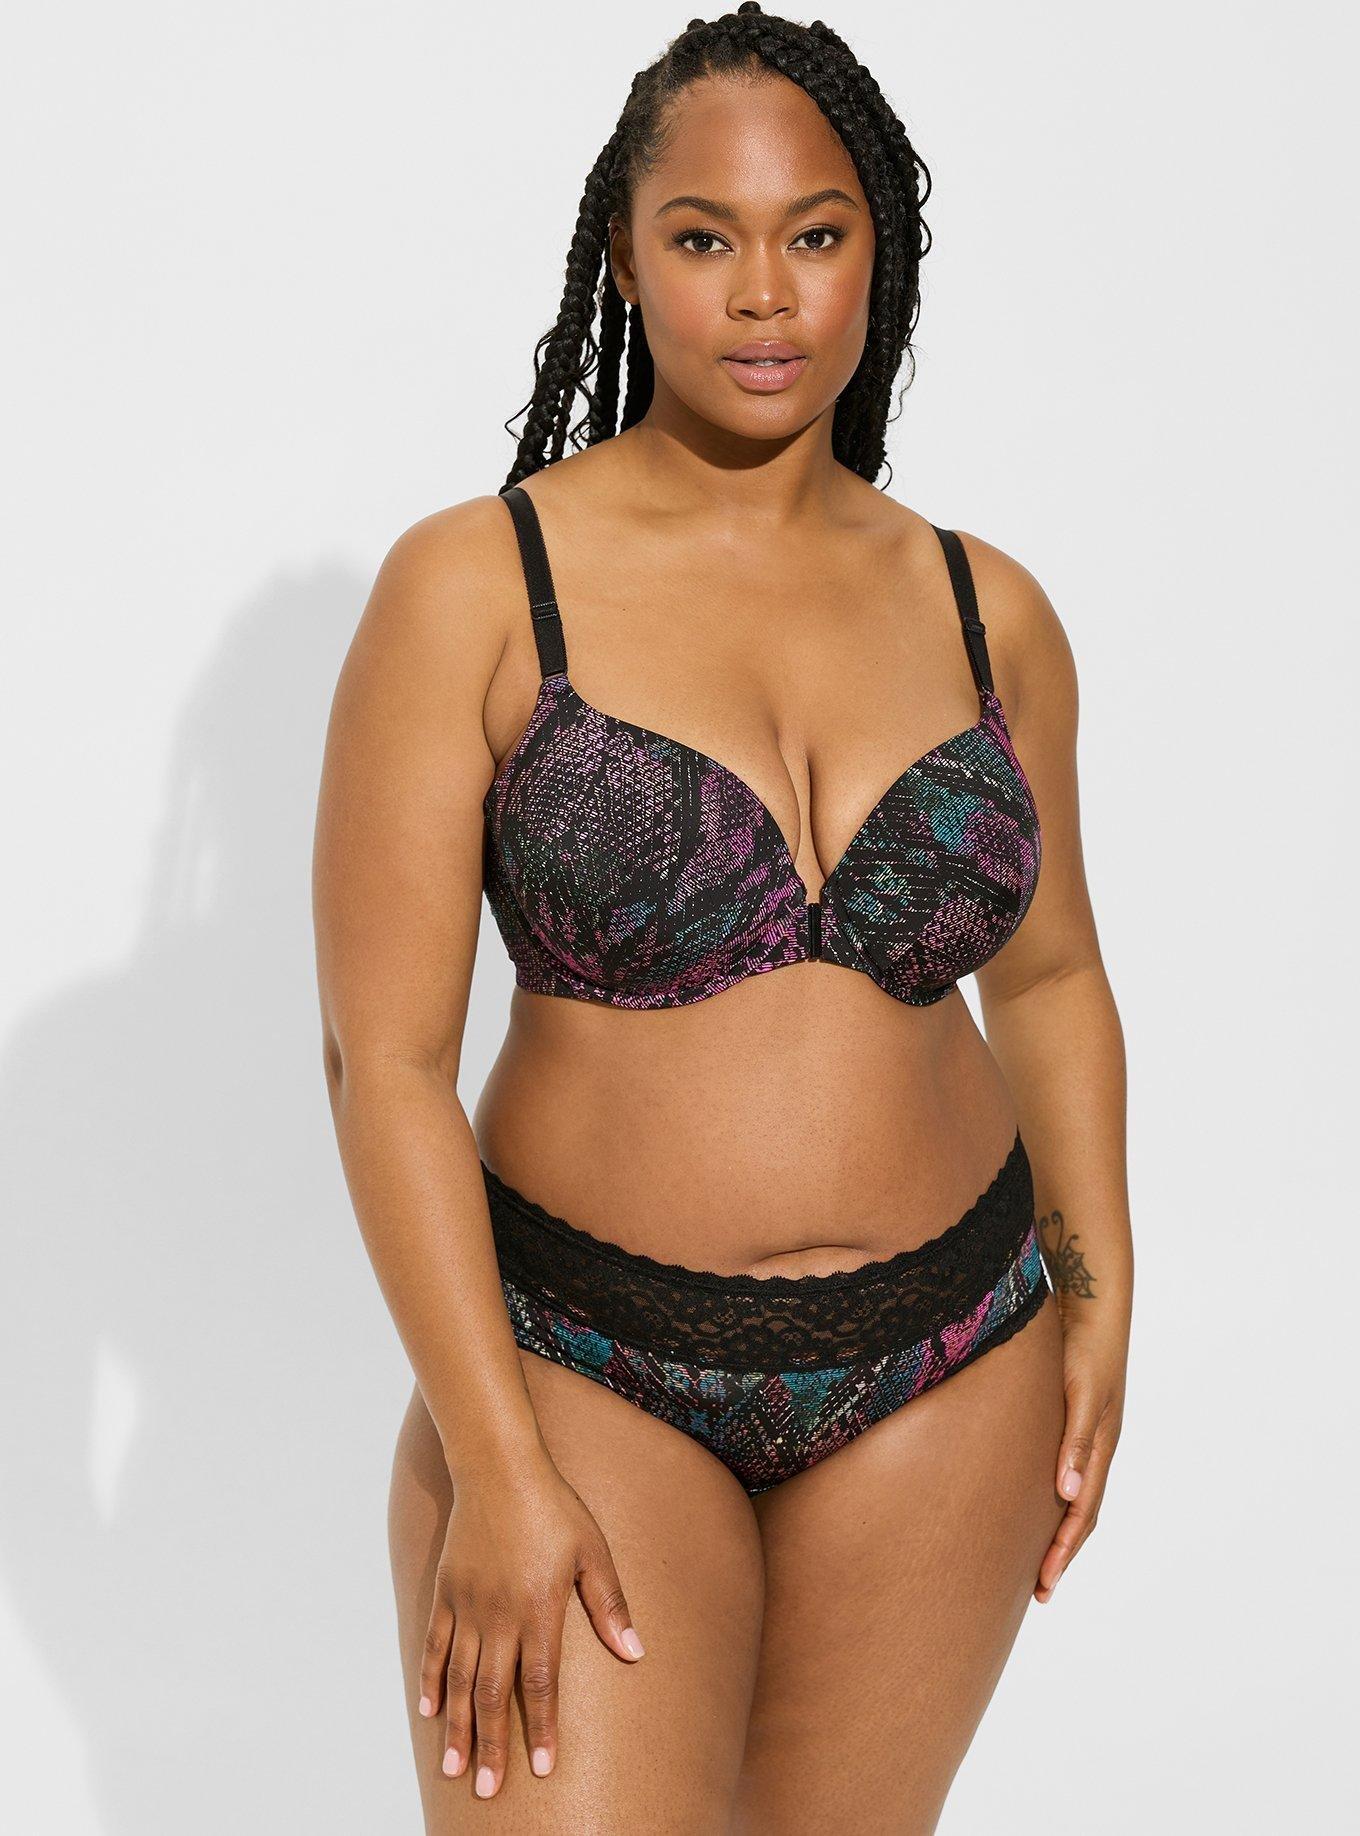 Size 14-16 Full Coverage Plus Size Bras: Cups B-K